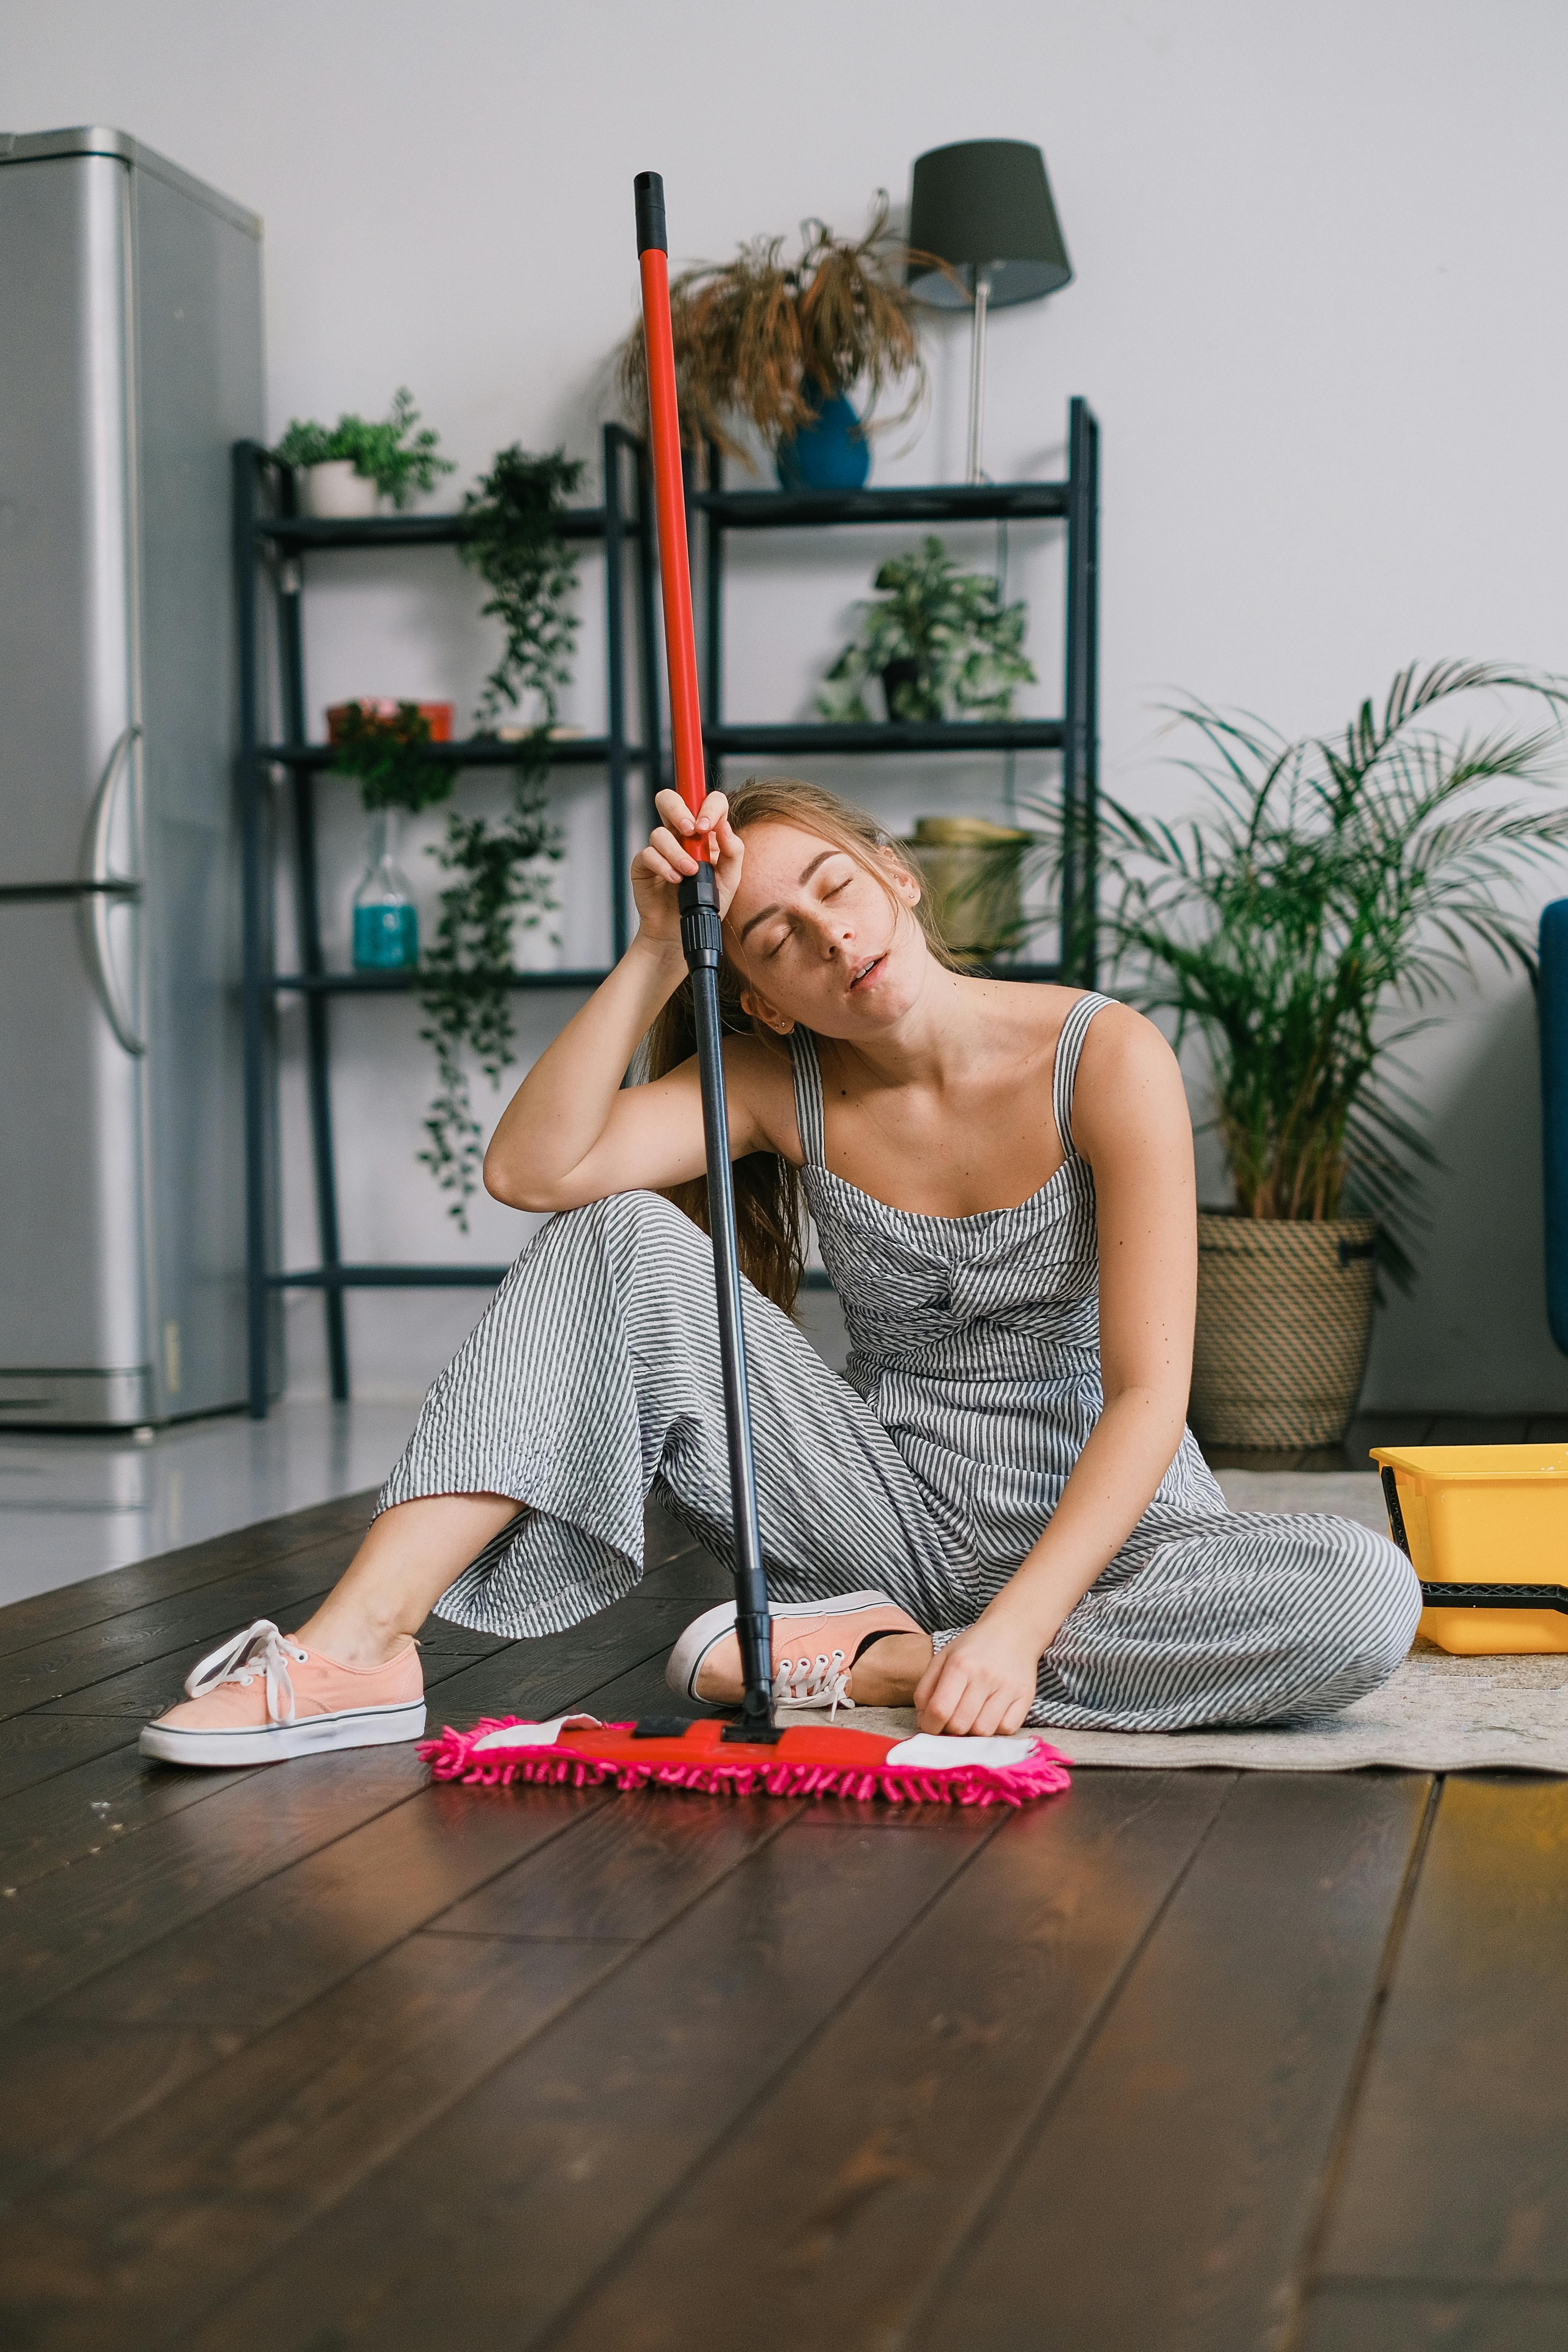 Woman on the floow looking tired as she holds a mop | Source: Pexels